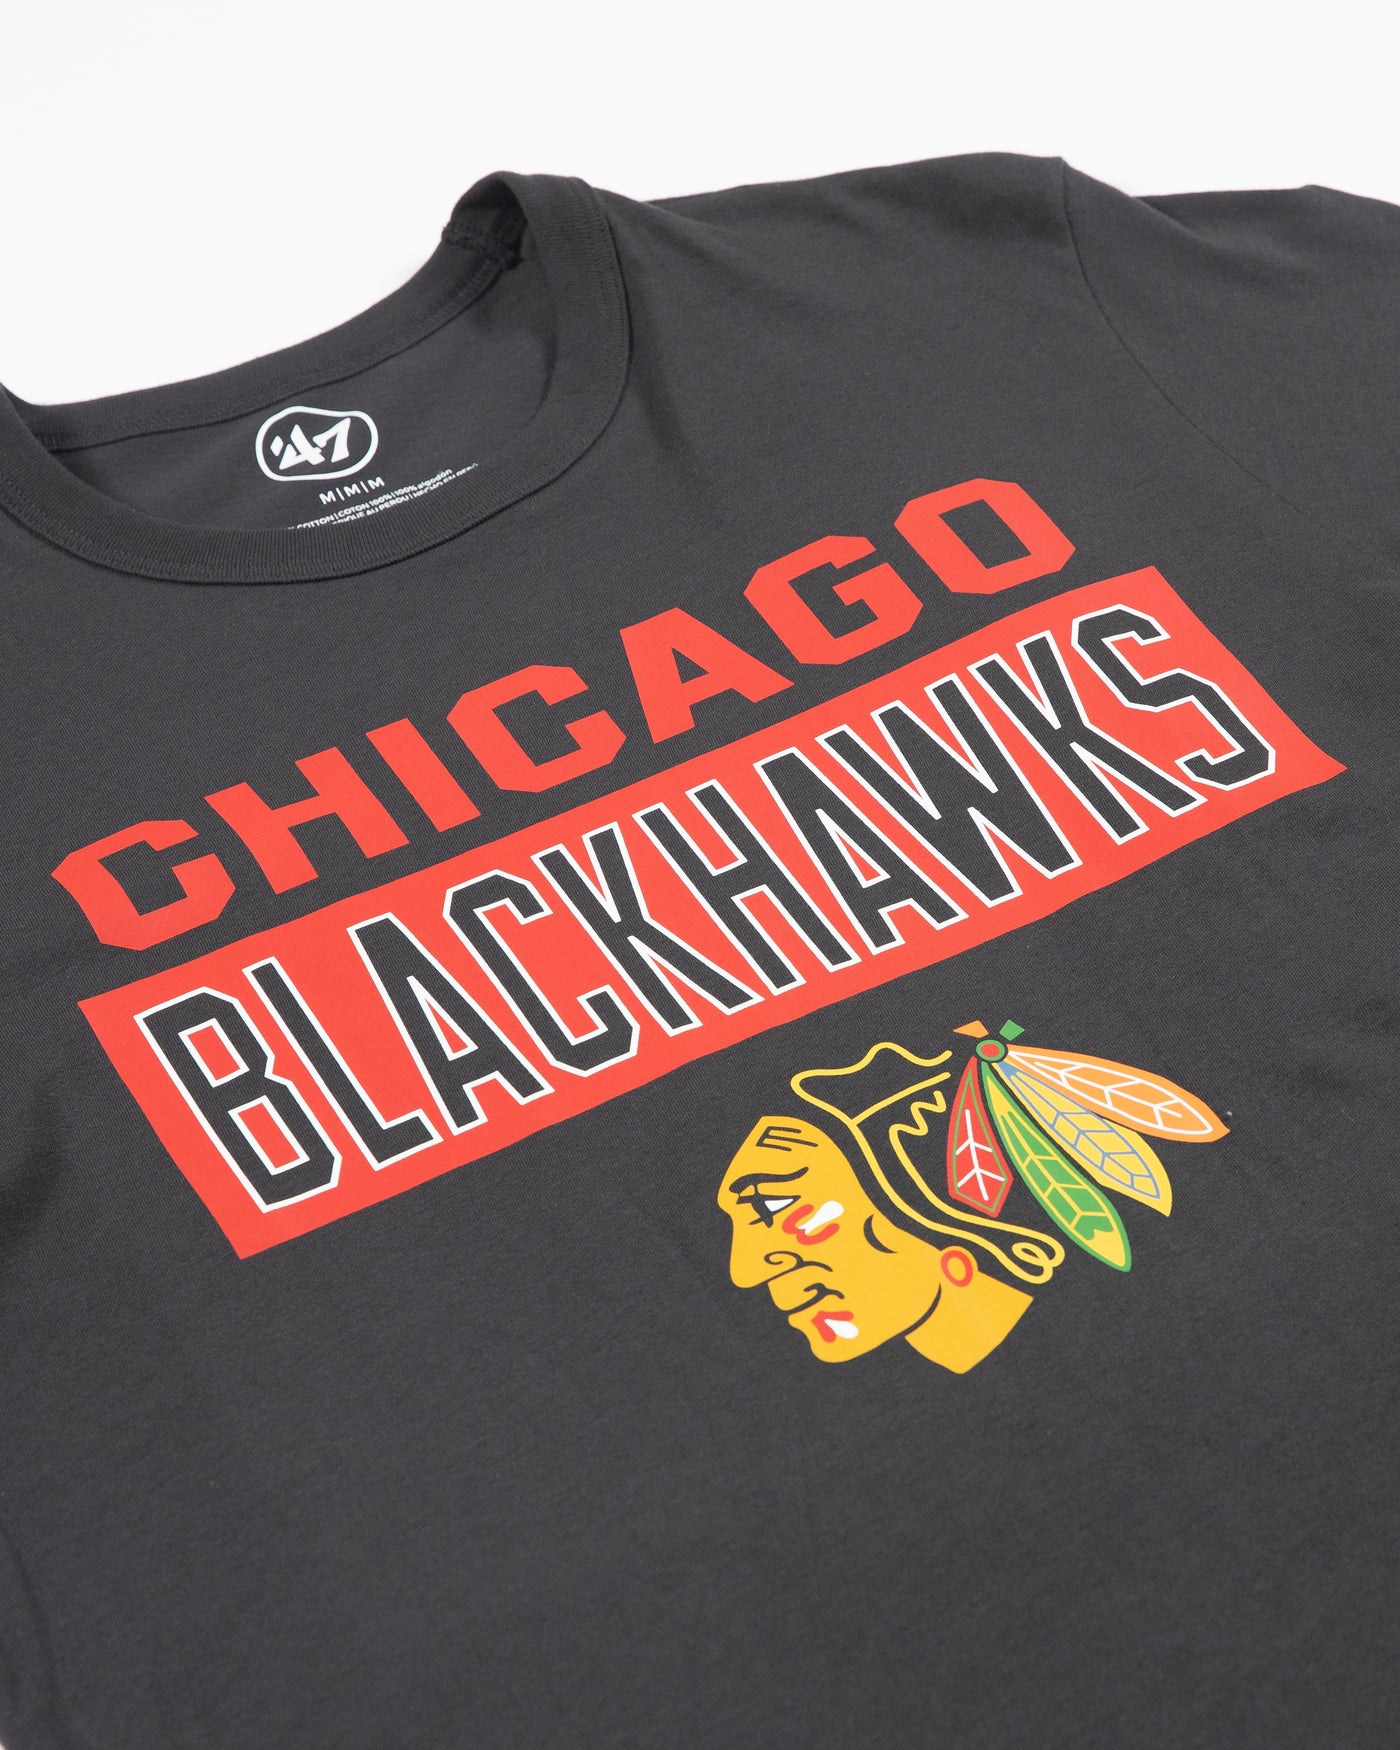 '47 brand black tee with Chicago Blackhawks wordmark and primary logo across chest - detail front lay flat